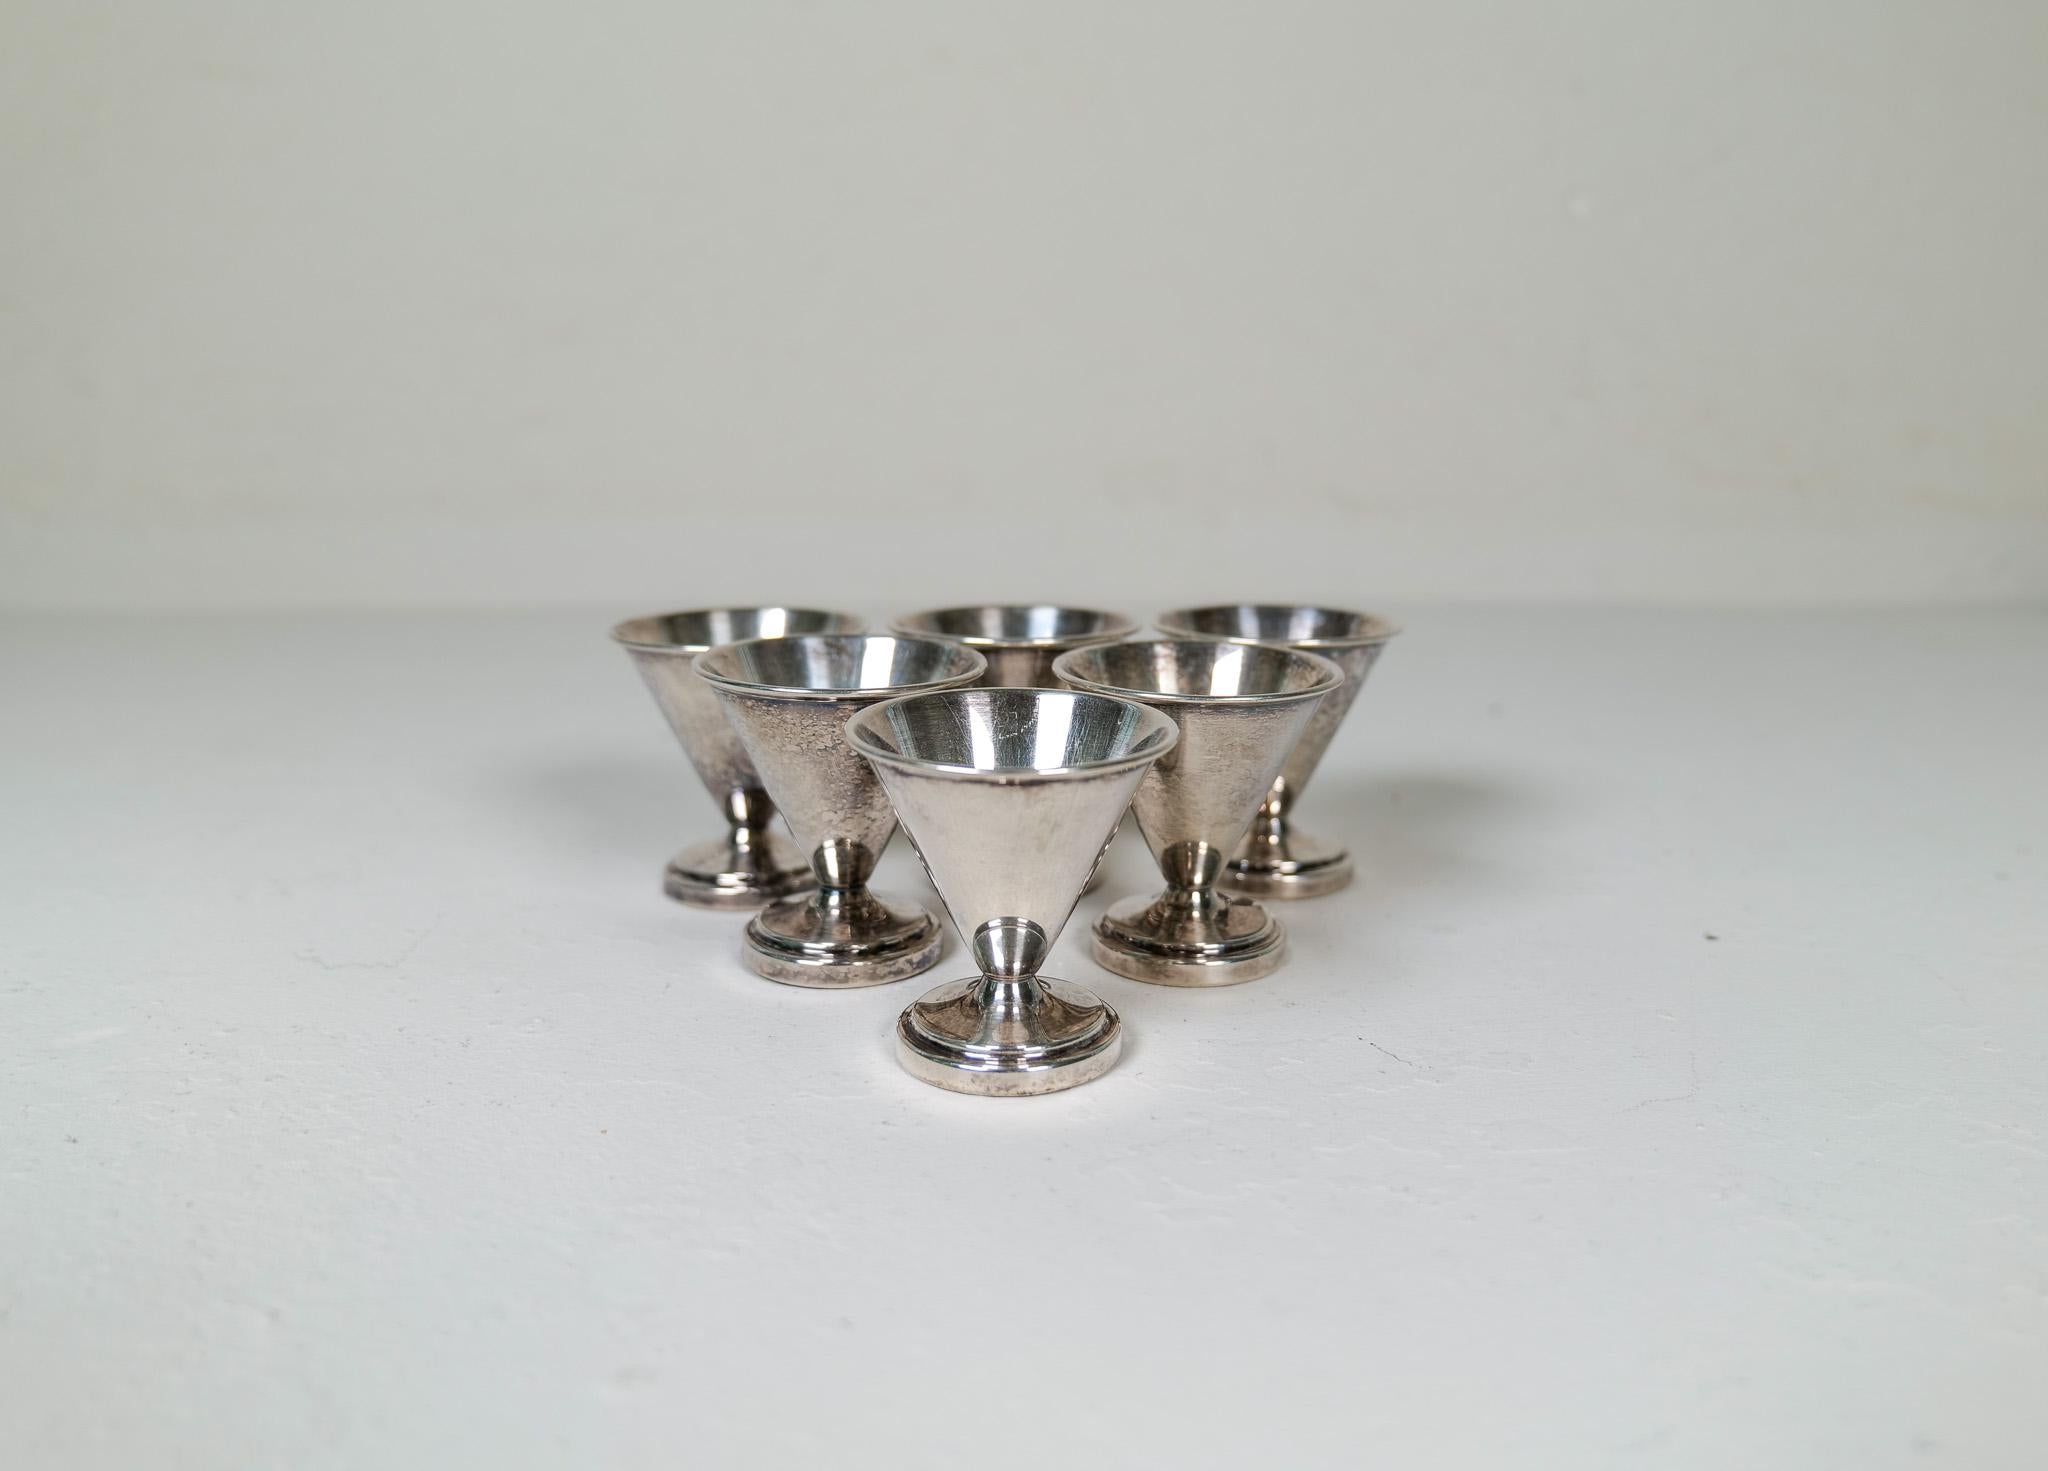 Art Deco Cocktail Shaker with 6 Small Glasses by Folke Arström, Sweden For Sale 5